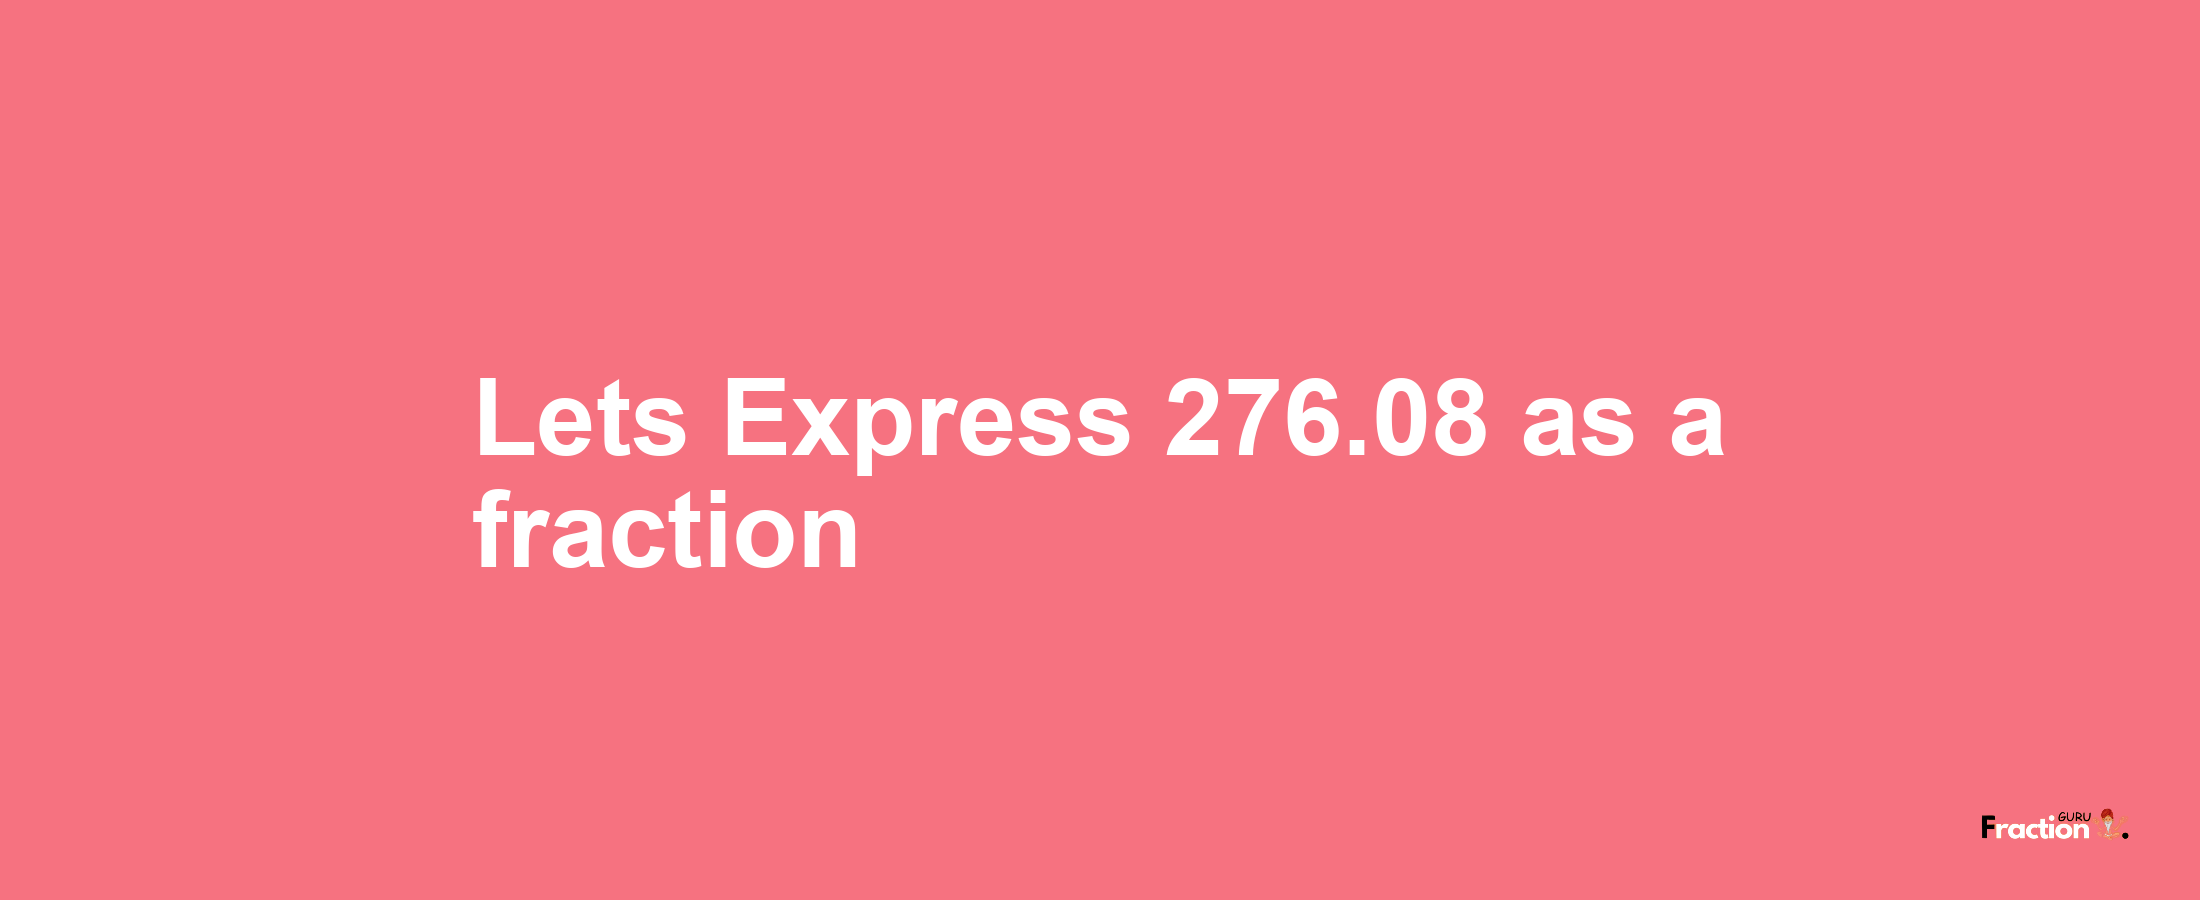 Lets Express 276.08 as afraction